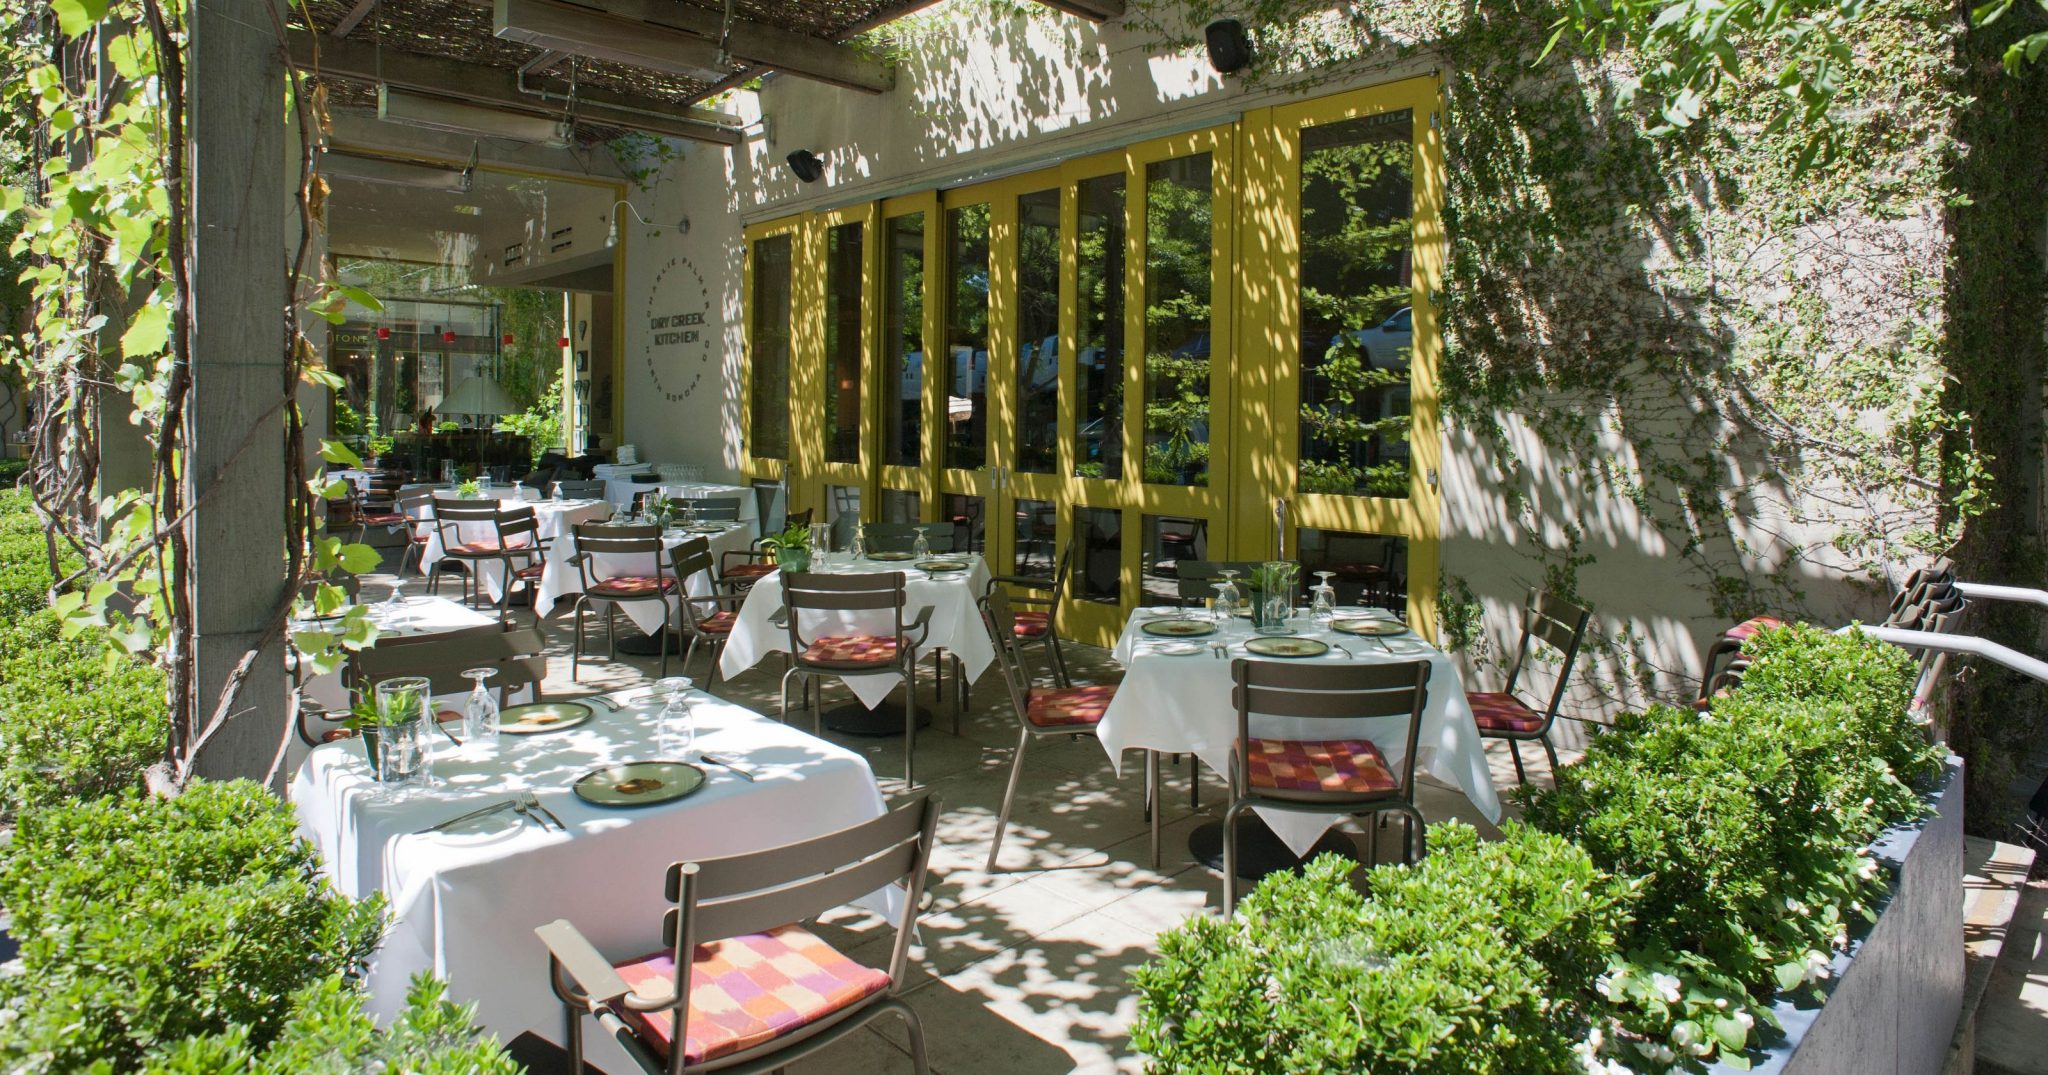 outdoor patio seating at Dry Creek Kitchen on the Healdsburg square